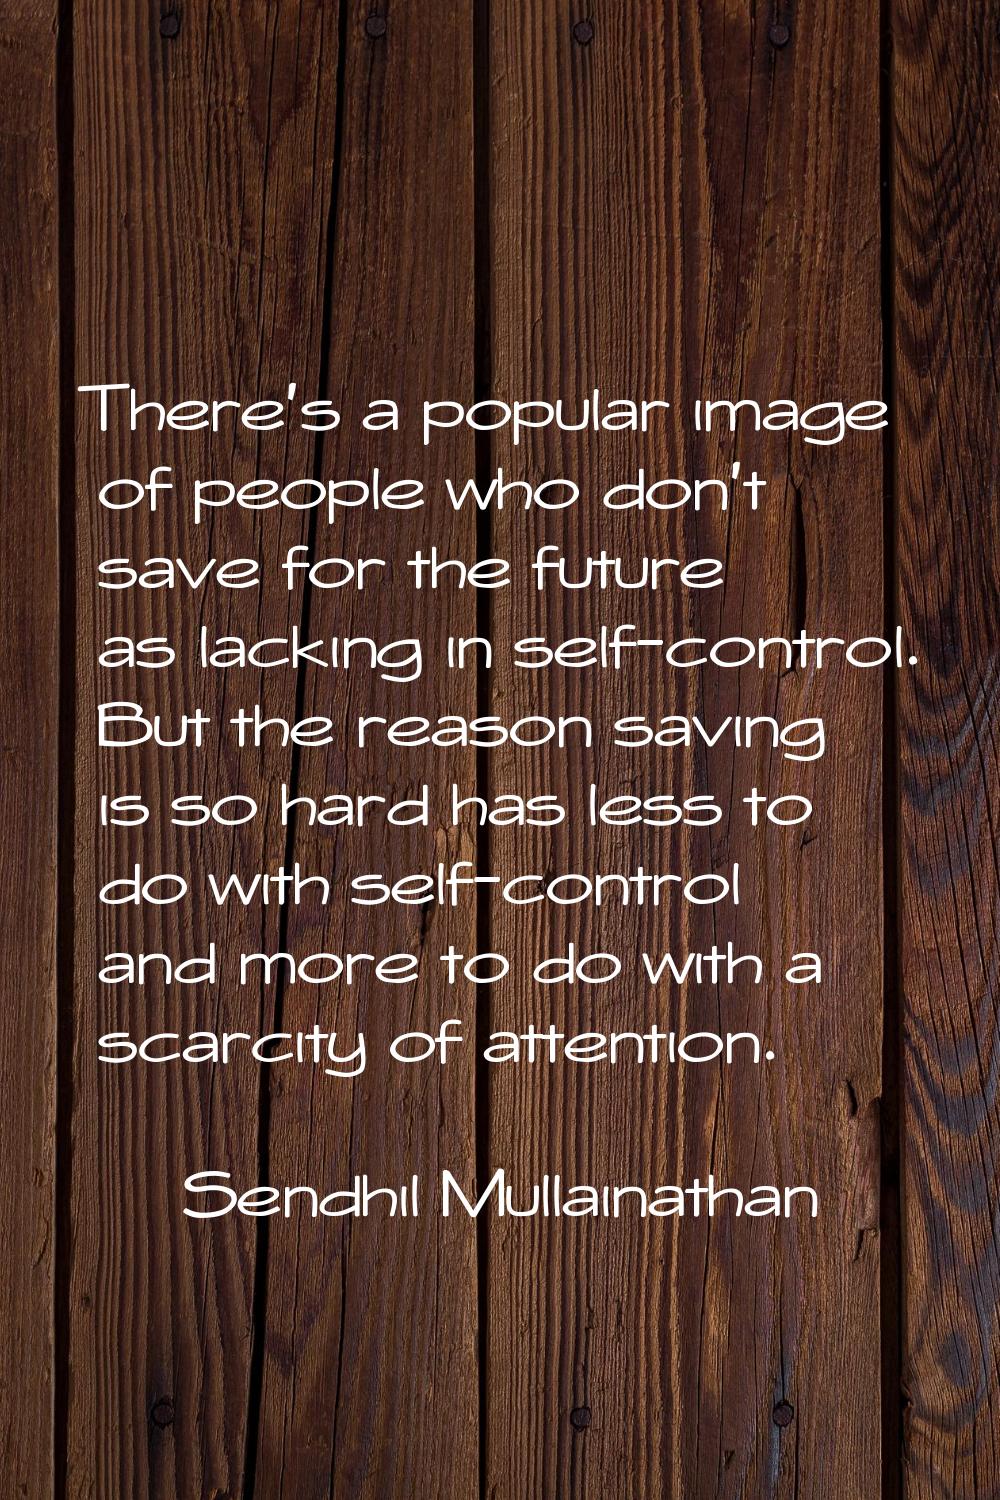 There's a popular image of people who don't save for the future as lacking in self-control. But the